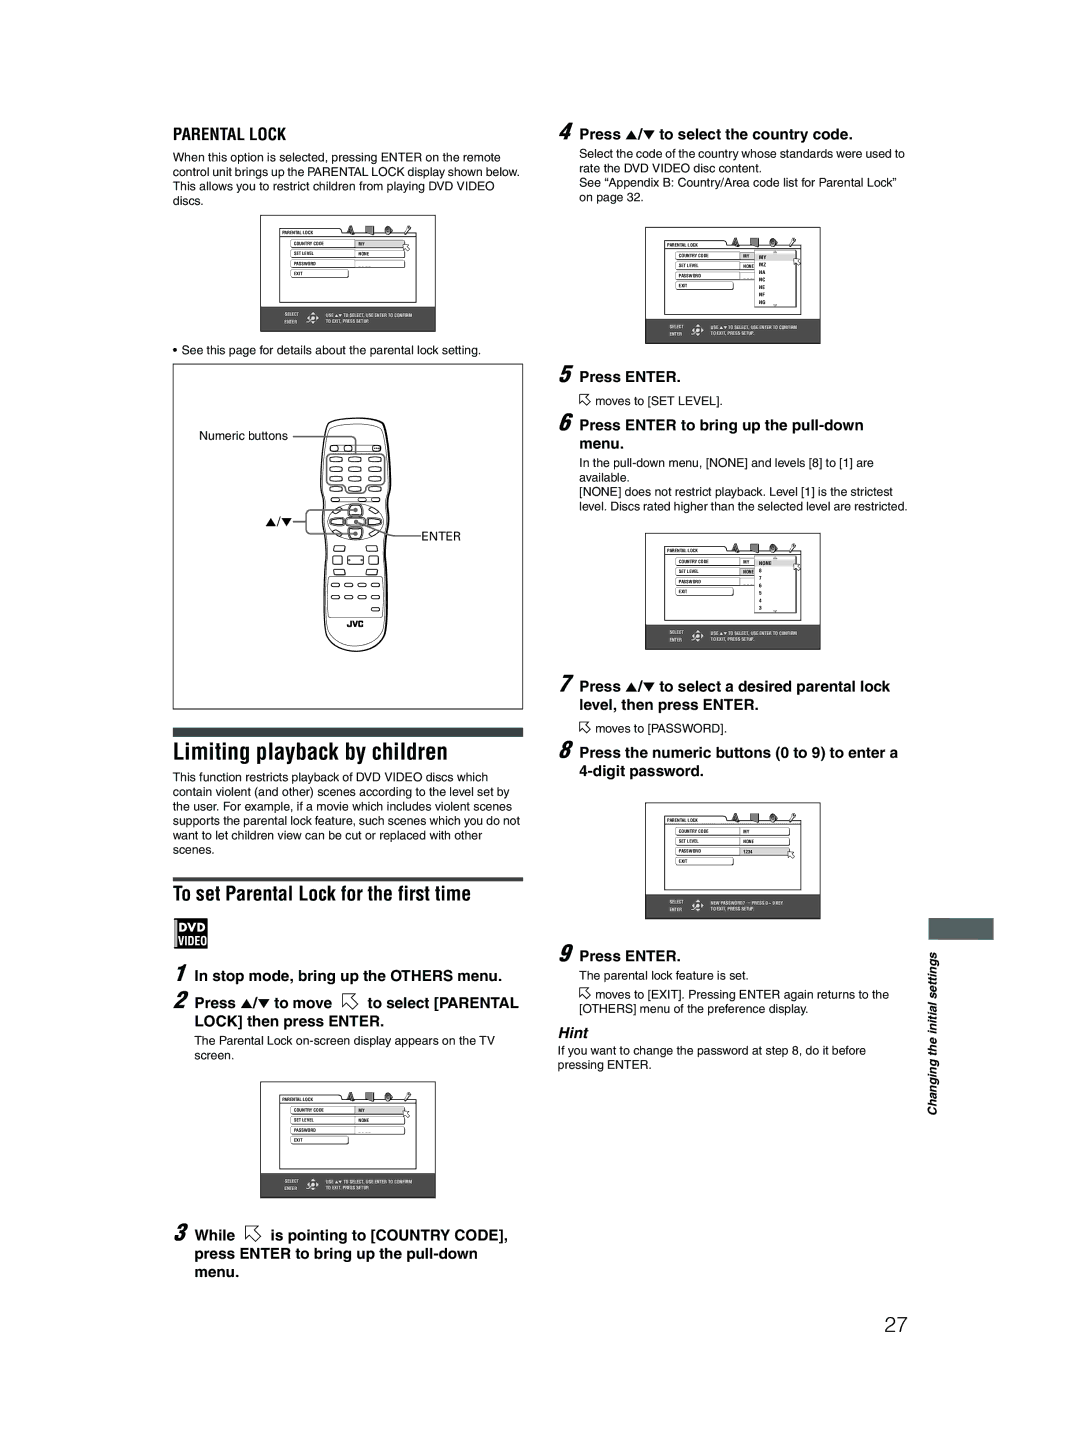 JVC XV-N412S Limiting playback by children, To set Parental Lock for the first time, Stop mode, bring up the Others menu 